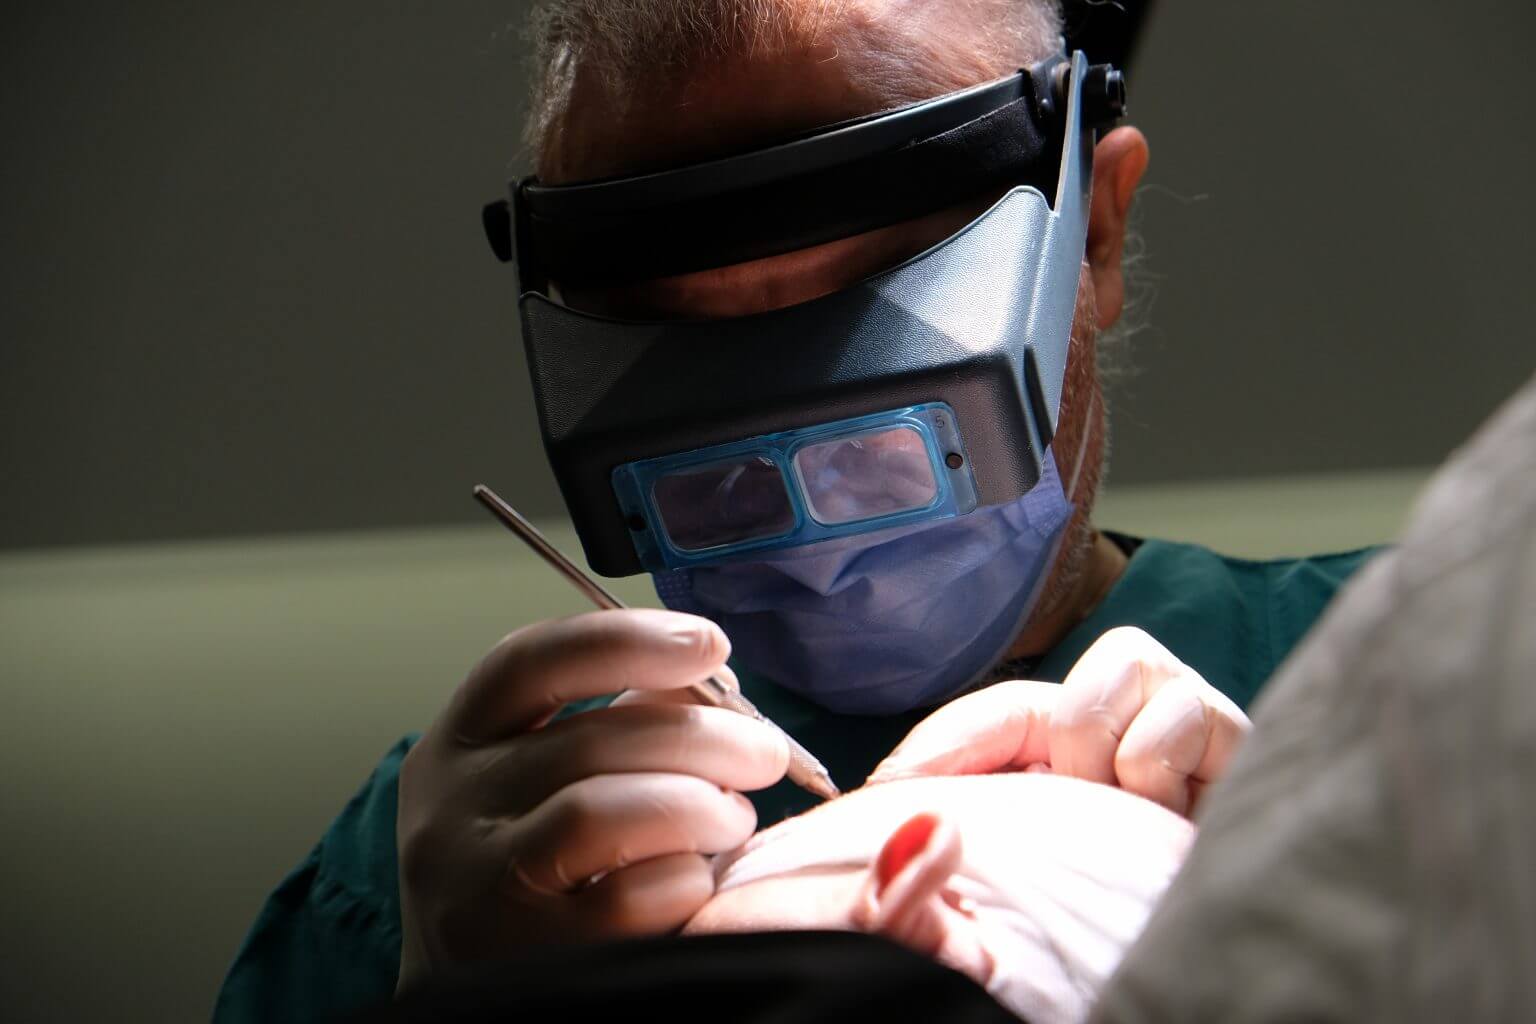 hair transplant surgeon doing a fue surgery for hair loss